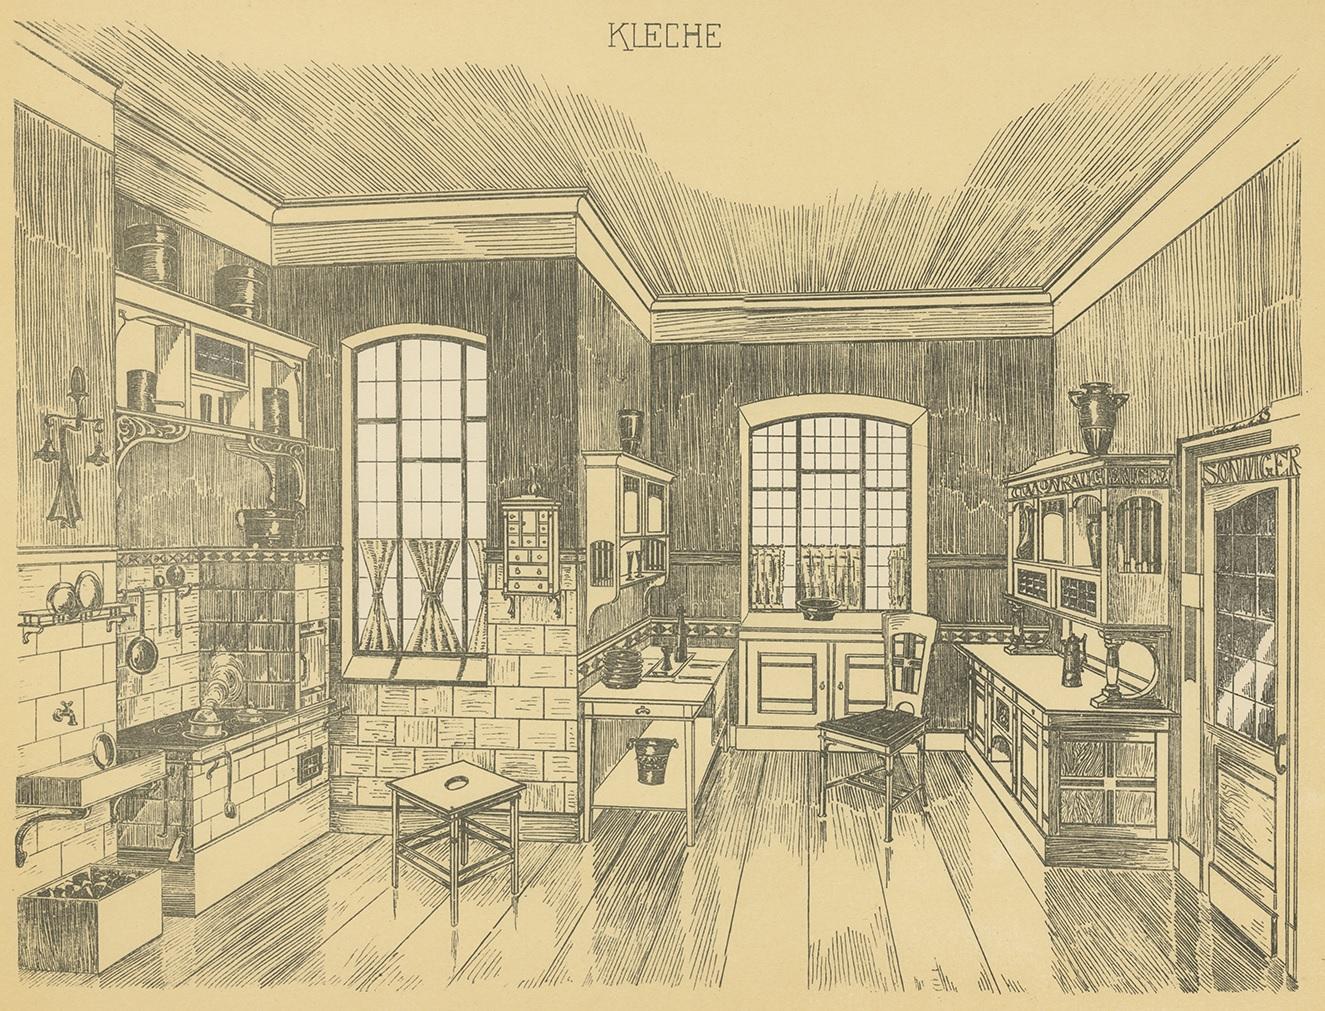 Antique print titled 'Kleche'. Lithograph of a kitchen. This print originates from 'Det Moderna Hemmet' by Johannes Kramer. Published by Ferdinand Hey'l, circa 1910.